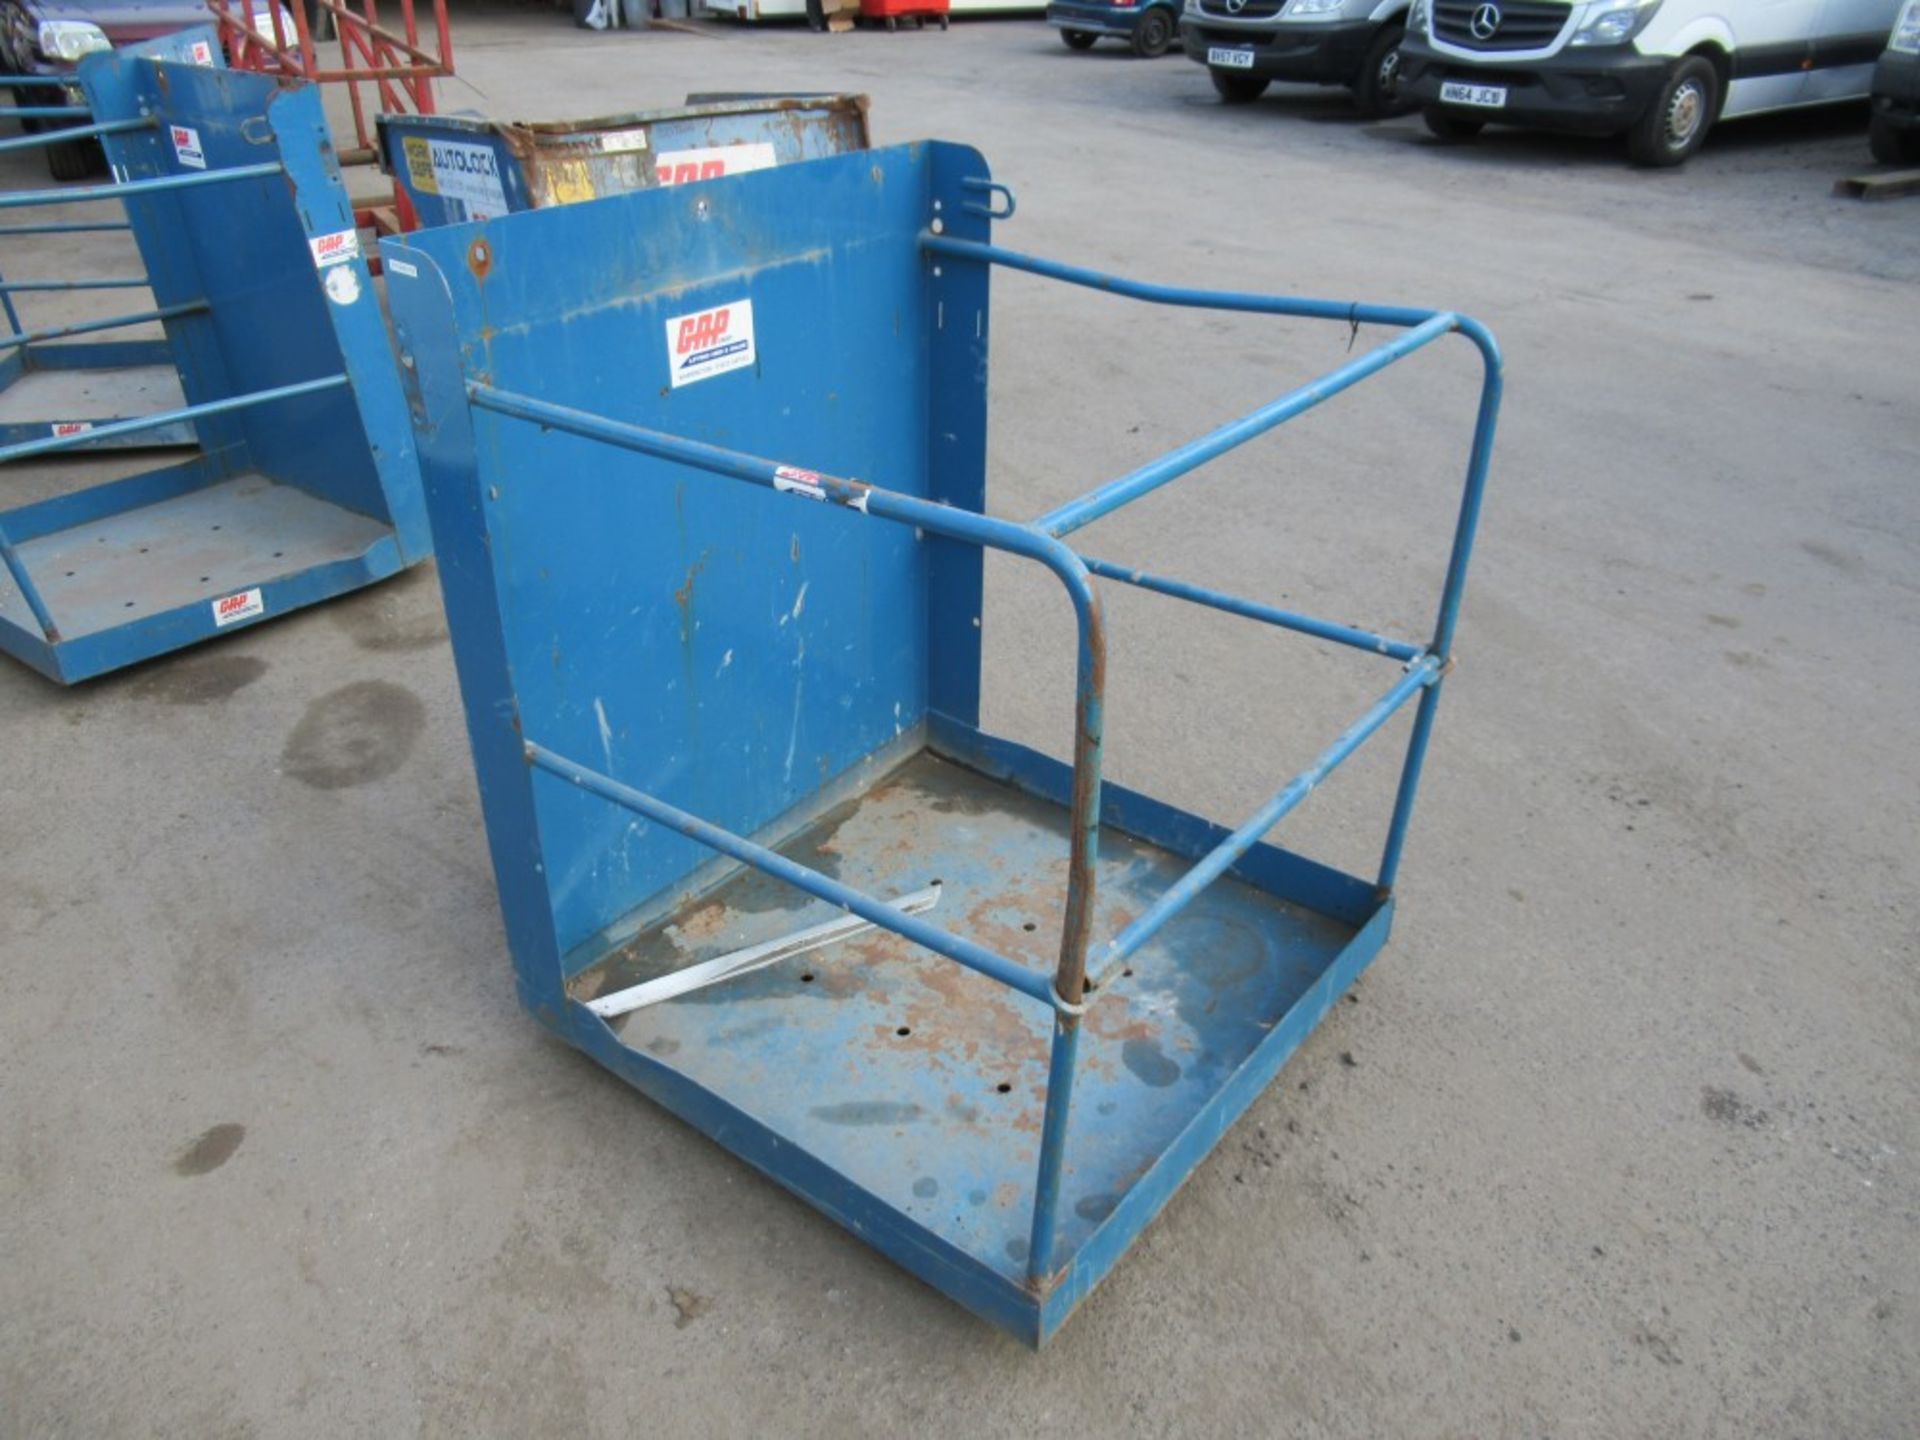 FORK LIFT ACESS CAGE (3199318) [+ VAT] - Image 2 of 2